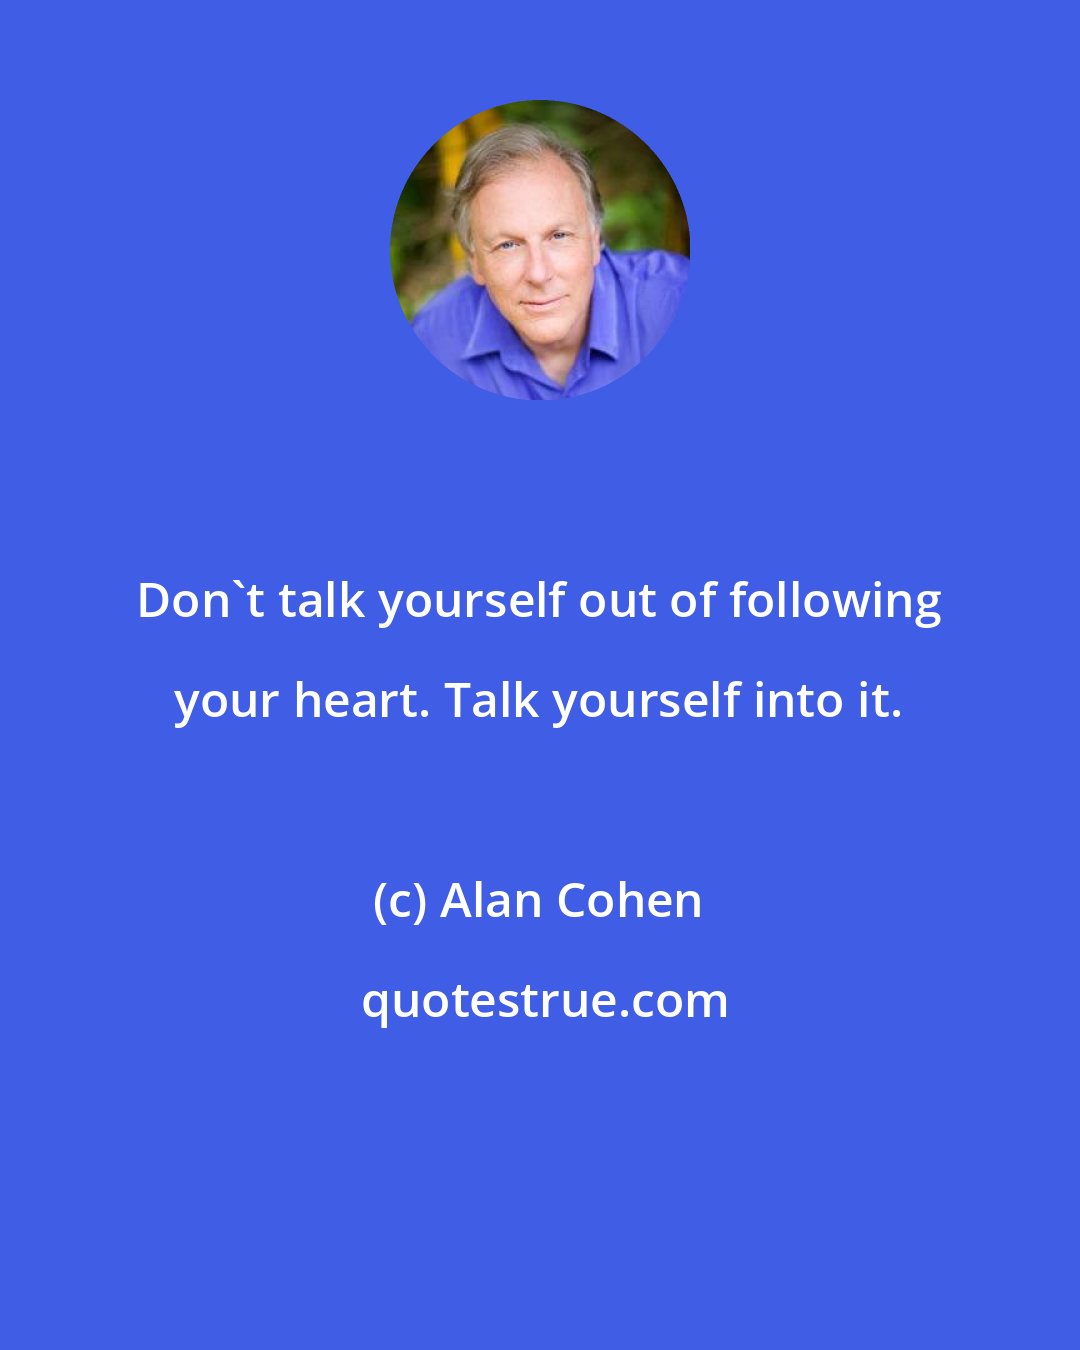 Alan Cohen: Don't talk yourself out of following your heart. Talk yourself into it.